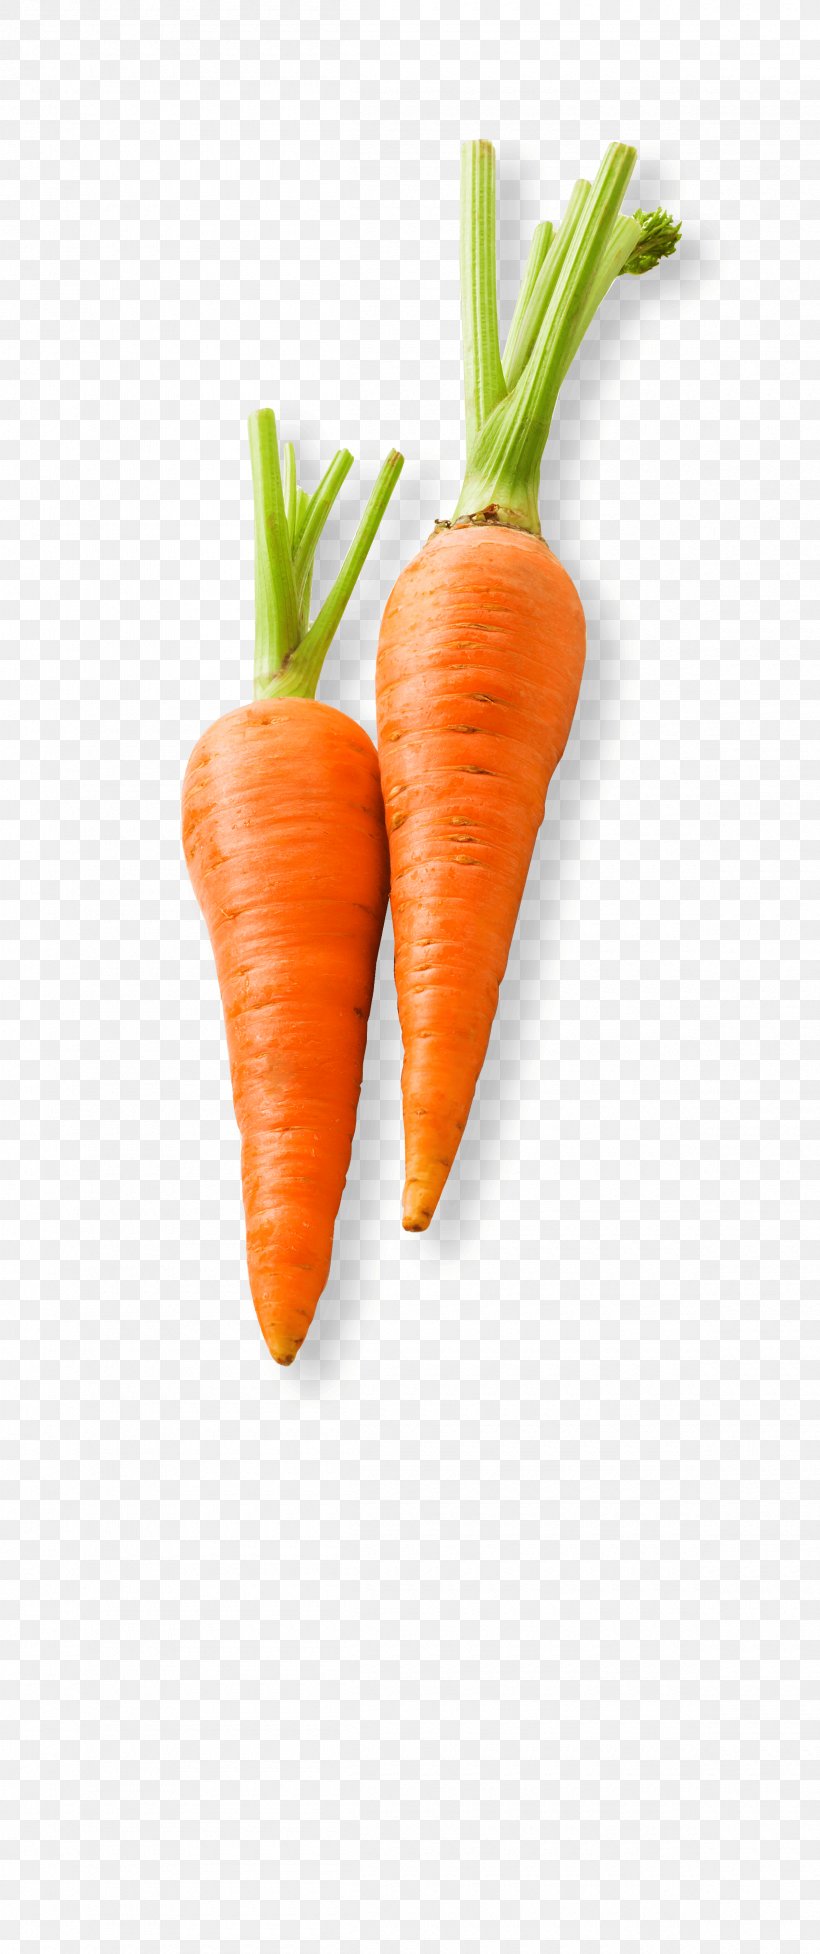 Baby Carrot Vegetable Food Carrot Cake, PNG, 2400x5721px, Carrot, Baby Carrot, Baby Food, Carrot Cake, Carrot Seed Oil Download Free